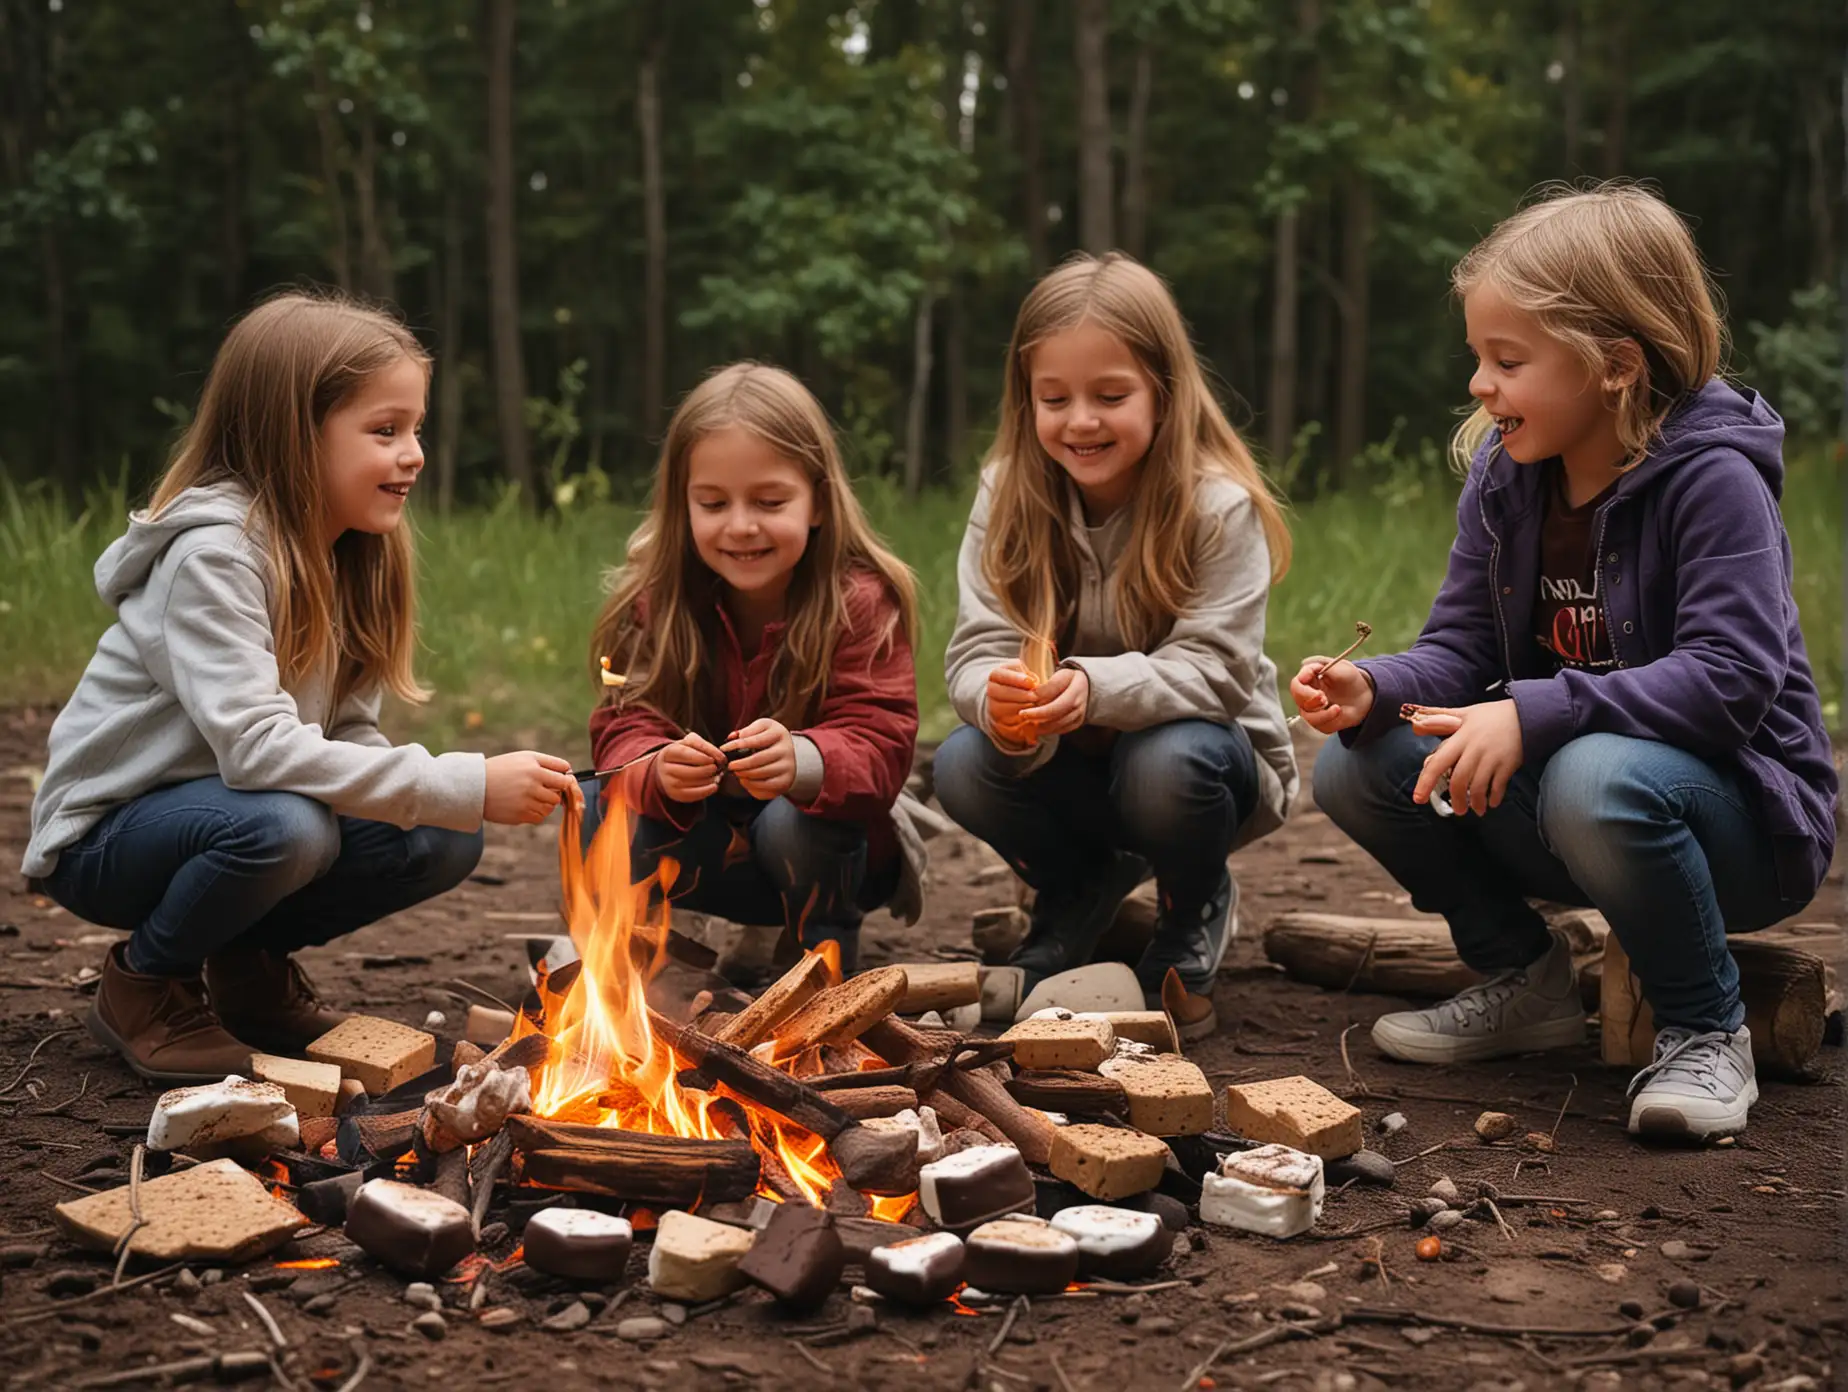 Children playing by a campfire making s'mores 